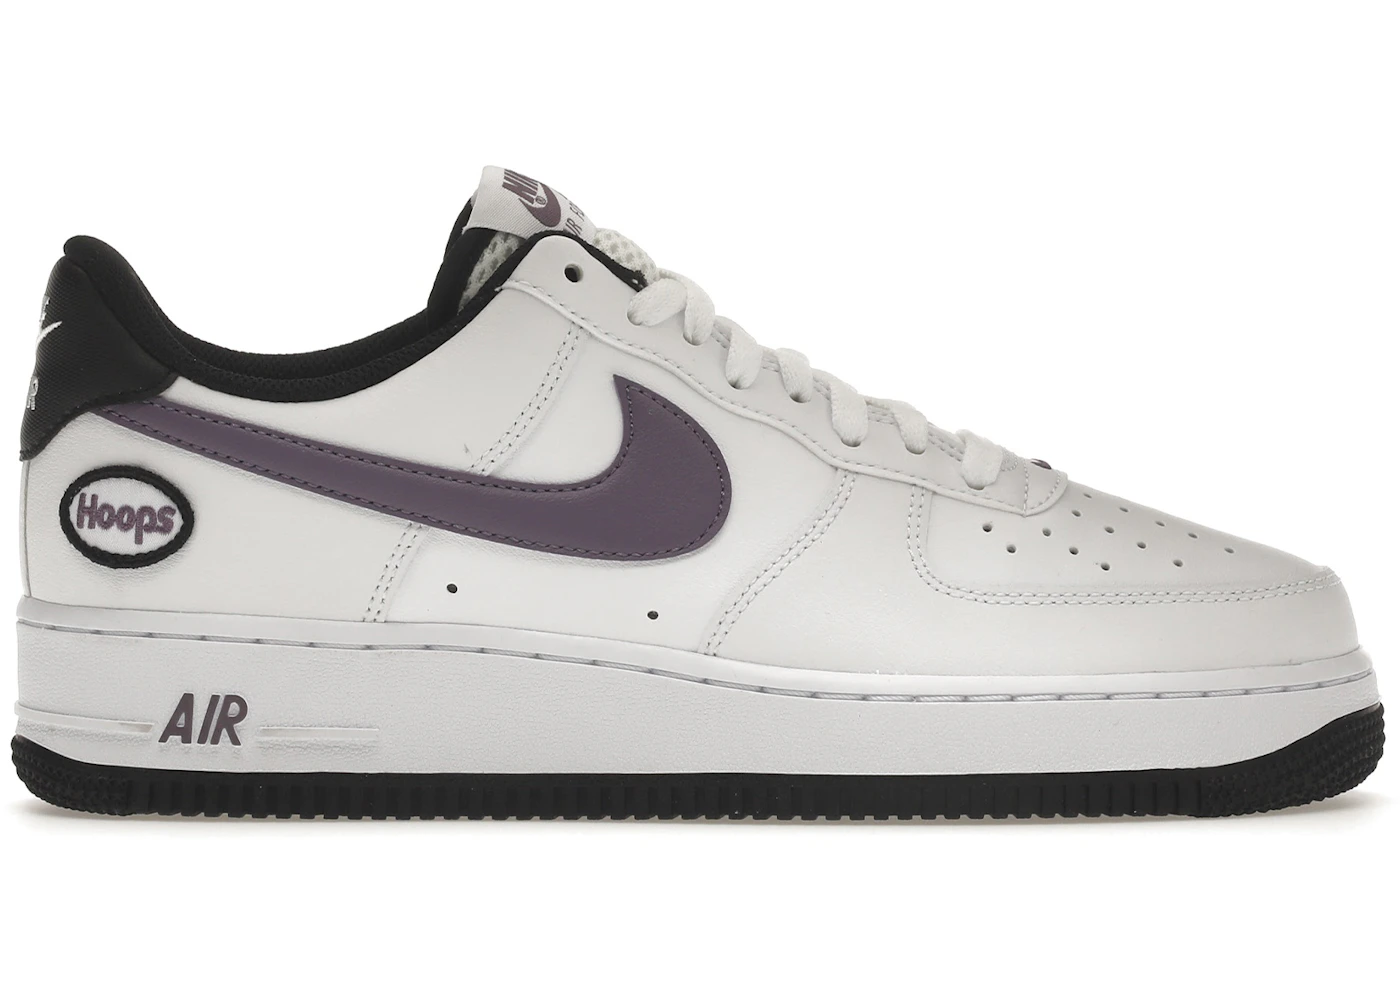 Nike Air Force 1 Low Hoops White Canyon Purple Men's - DH7440-100 - US